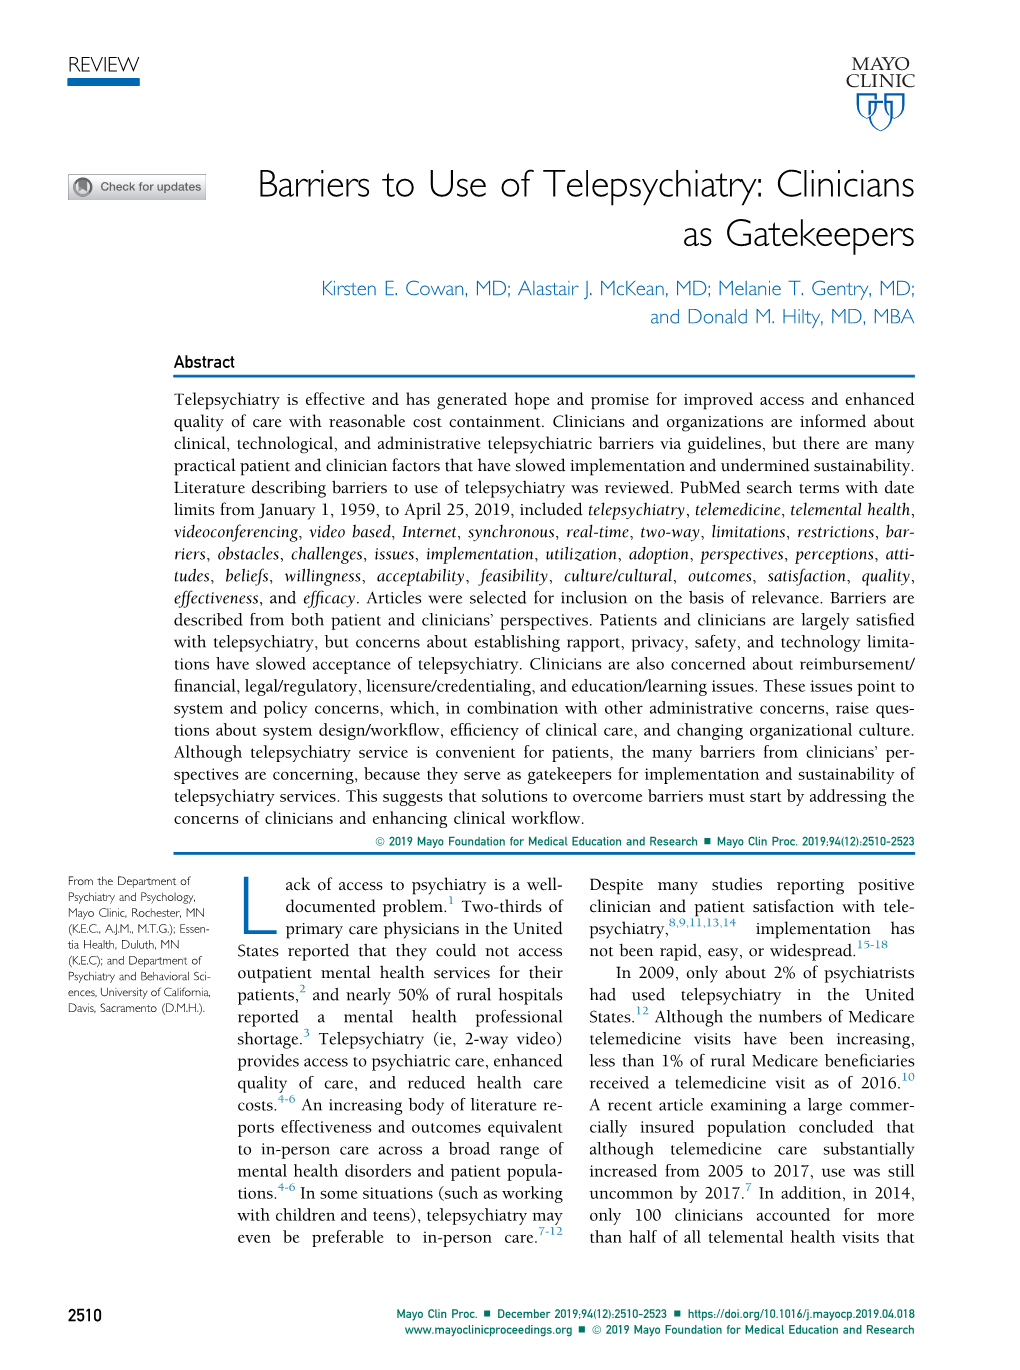 Barriers to Use of Telepsychiatry: Clinicians As Gatekeepers